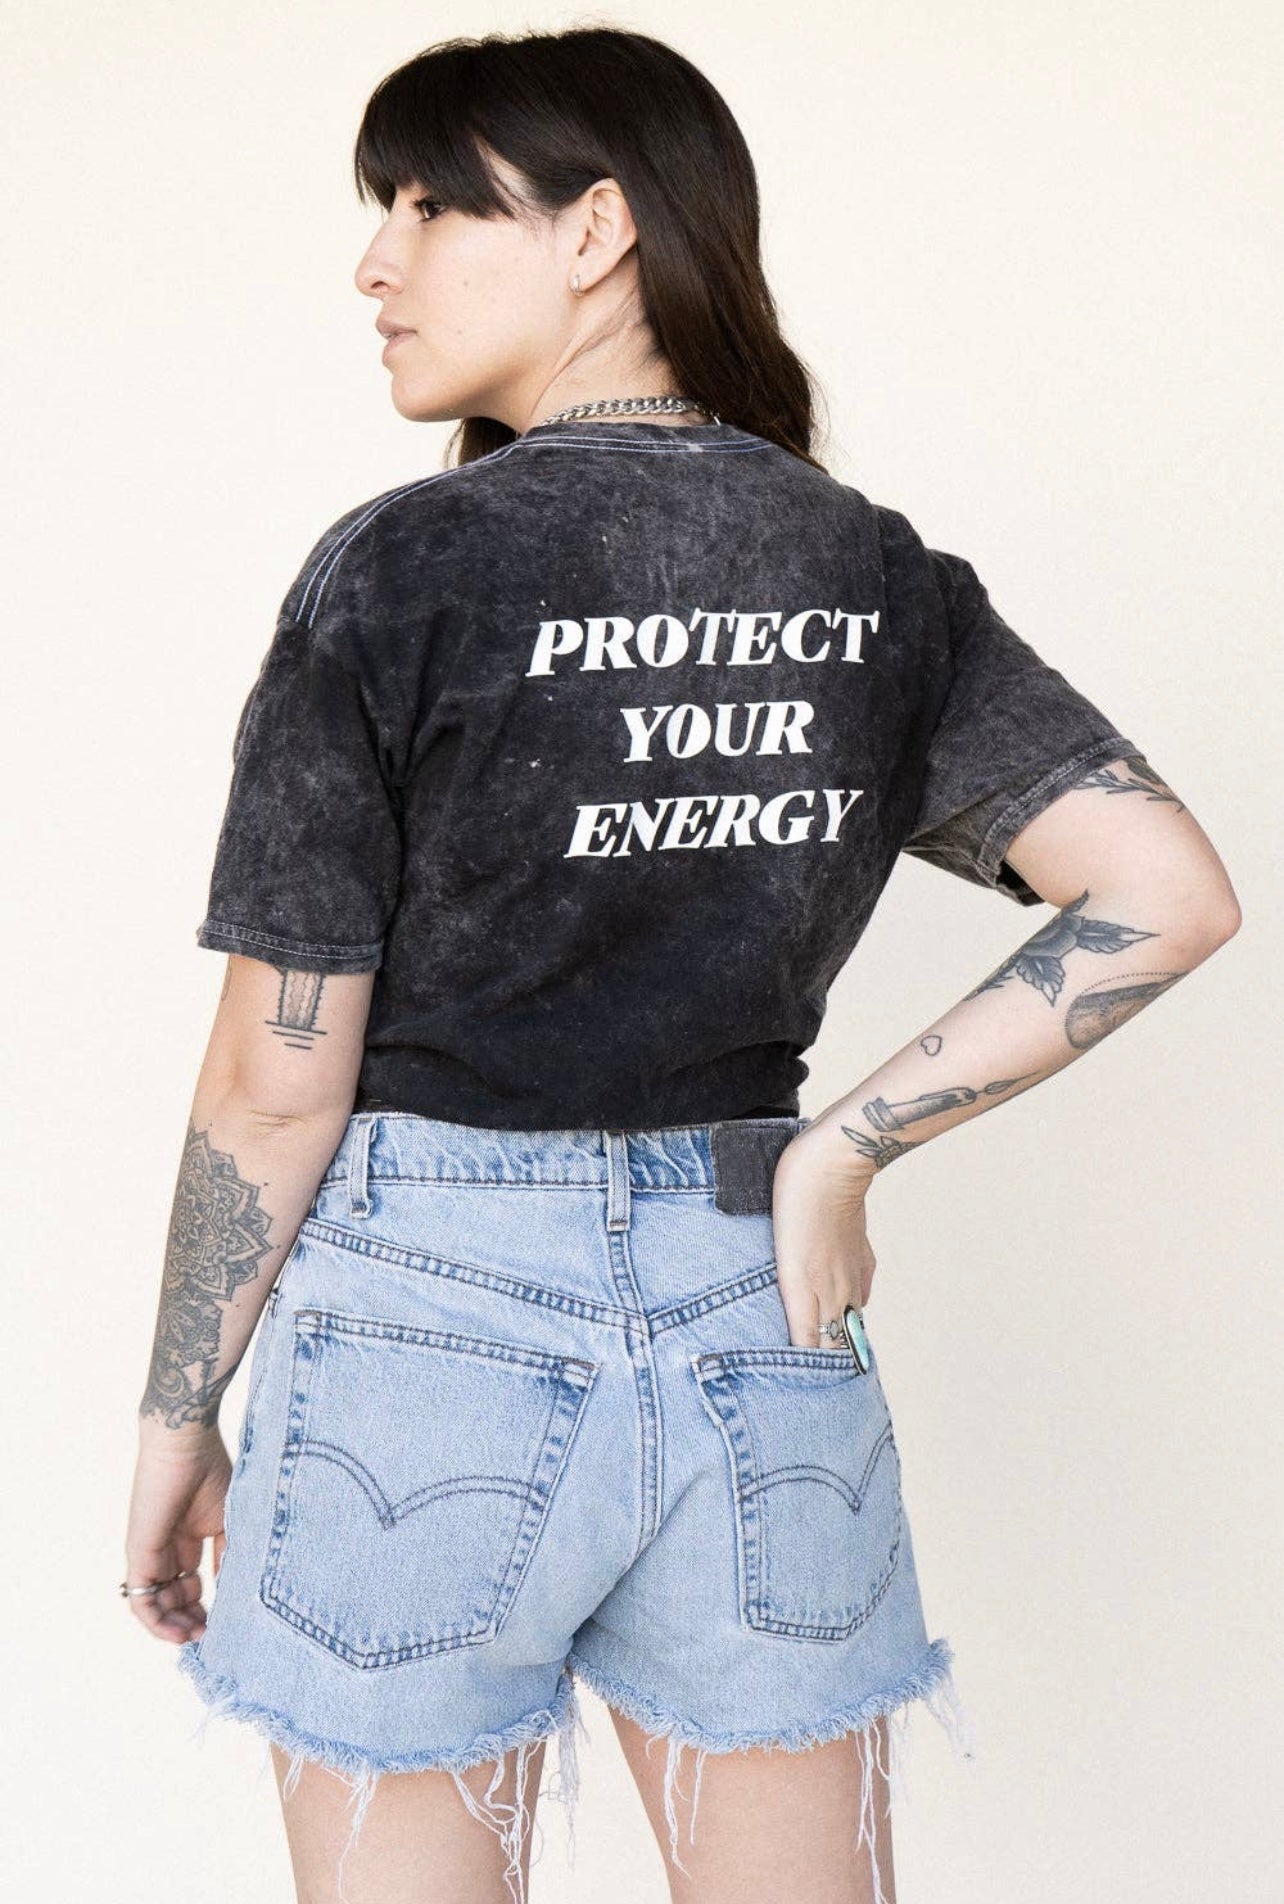 Protect Your Energy Mineral Washed Tee